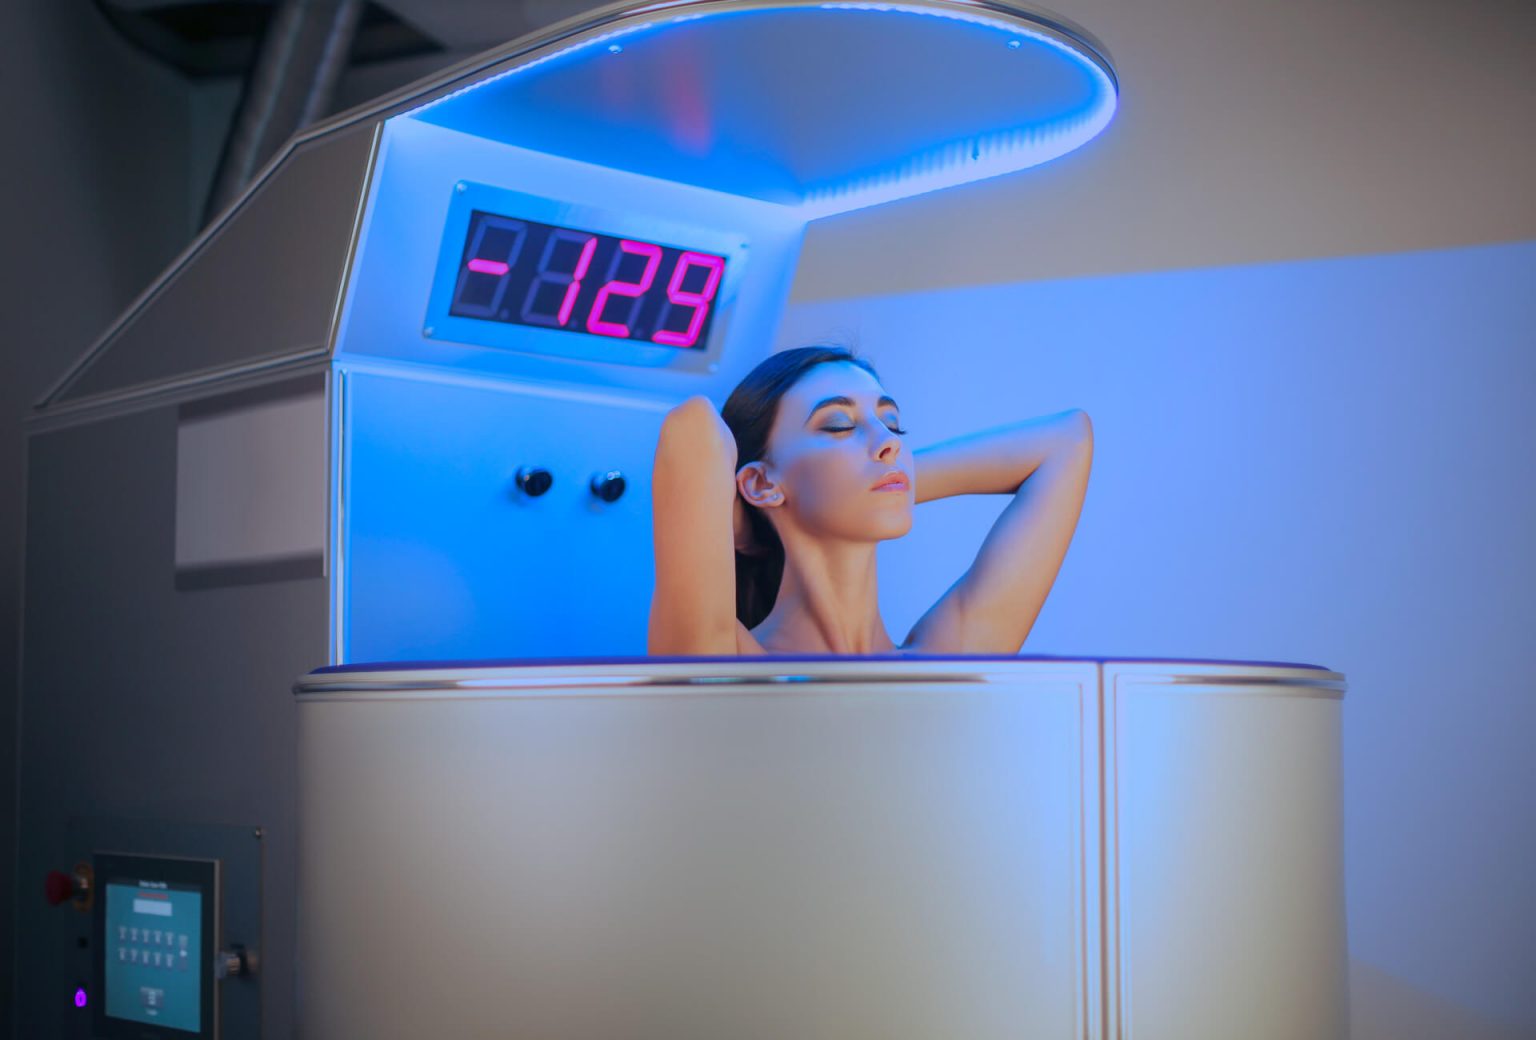 Cryotherapy devices